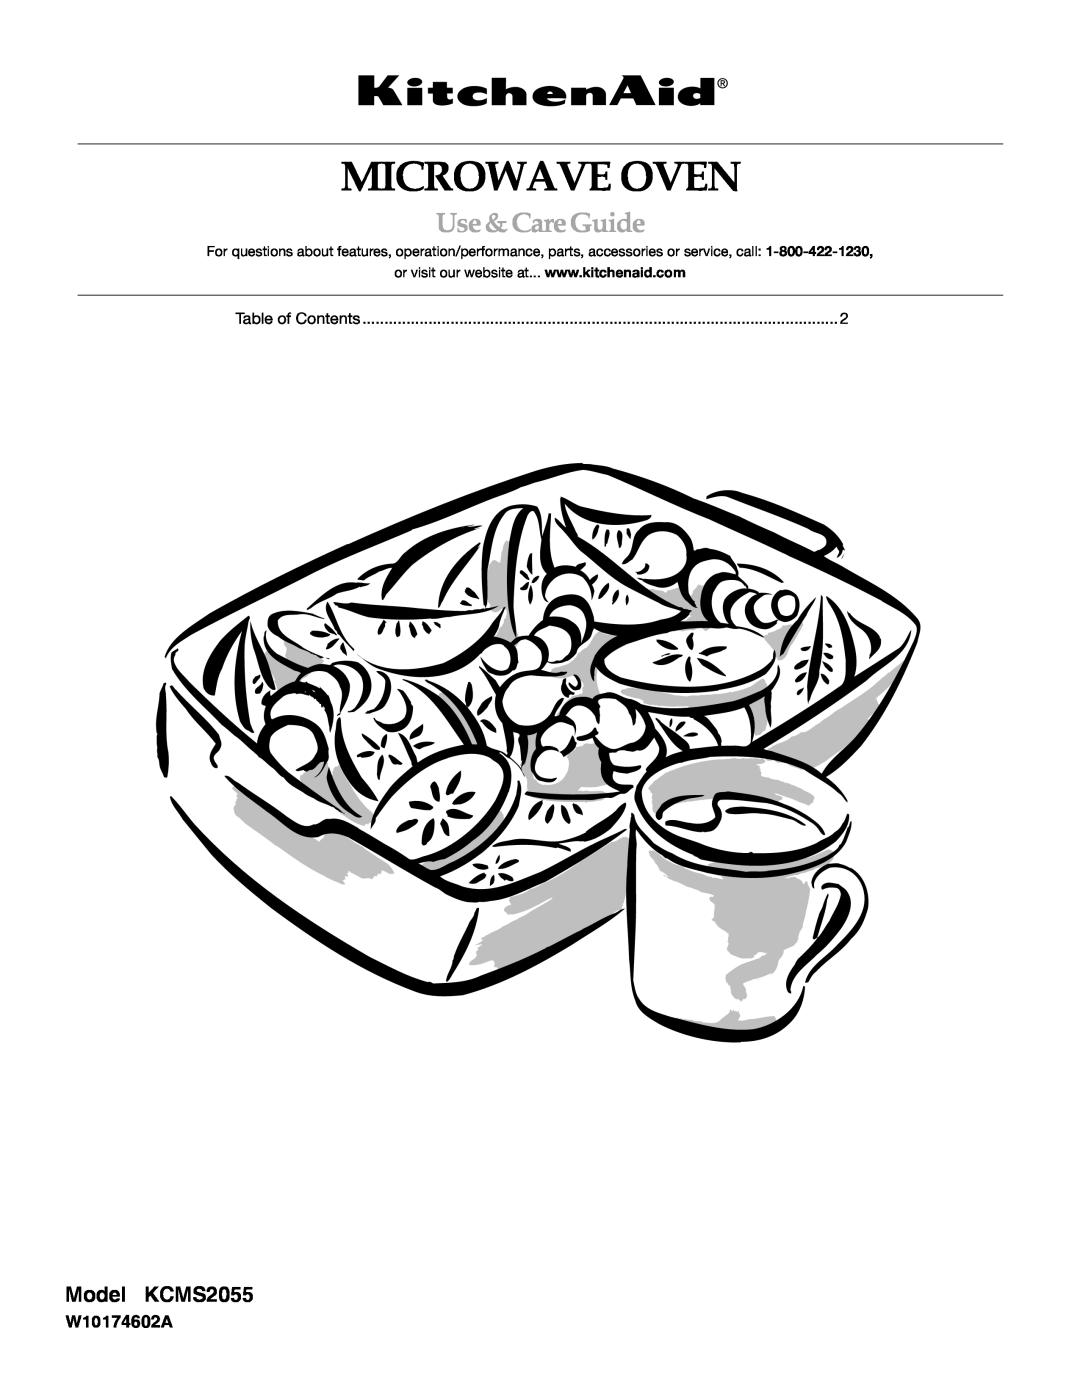 KitchenAid manual Model KCMS2055, Microwave Oven, Use&CareGuide, W10174602A 